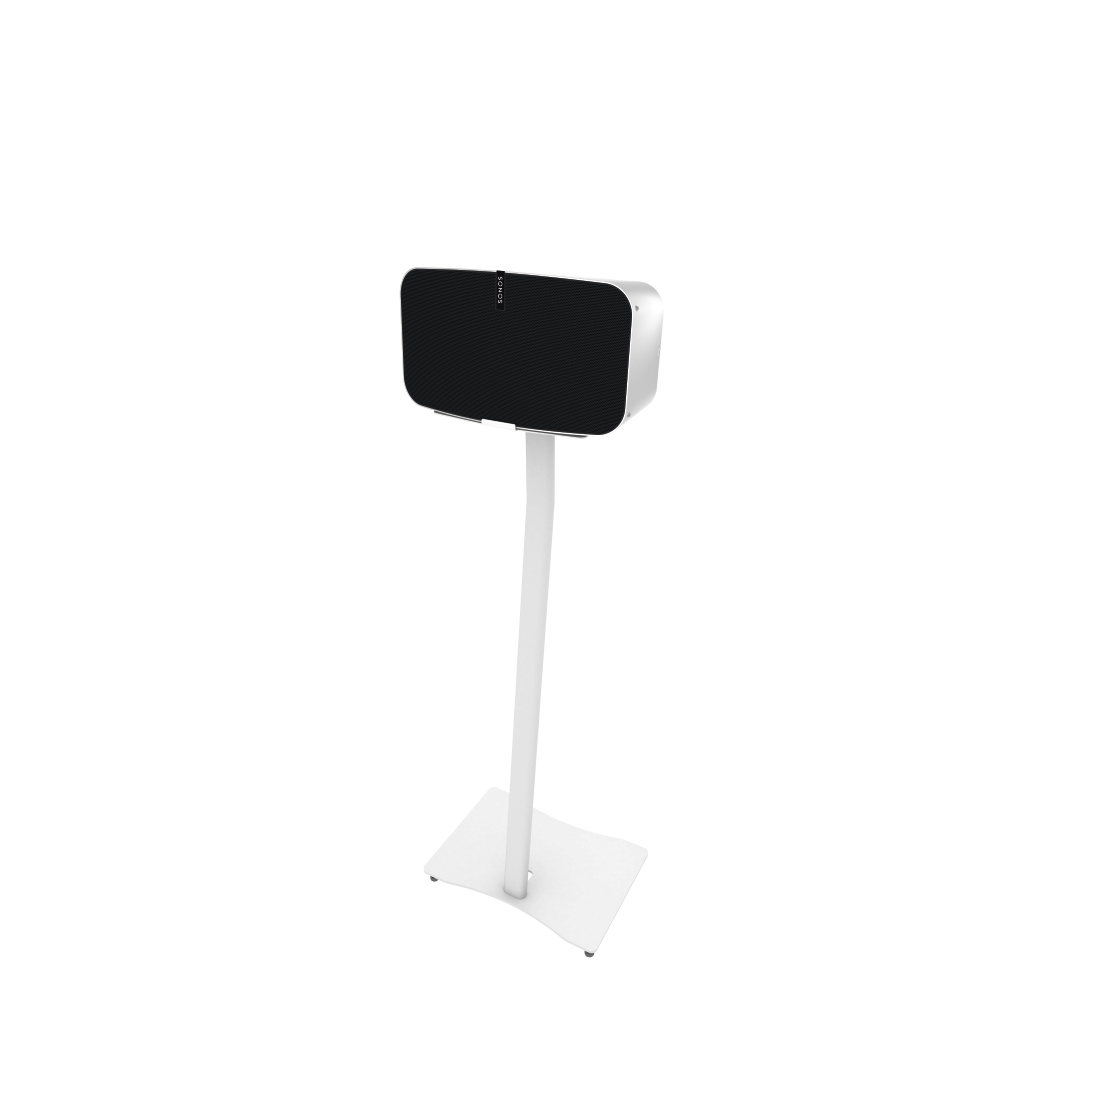 00118012 Hama Speaker Stand for Sonos PLAY:5, 2nd generation, white